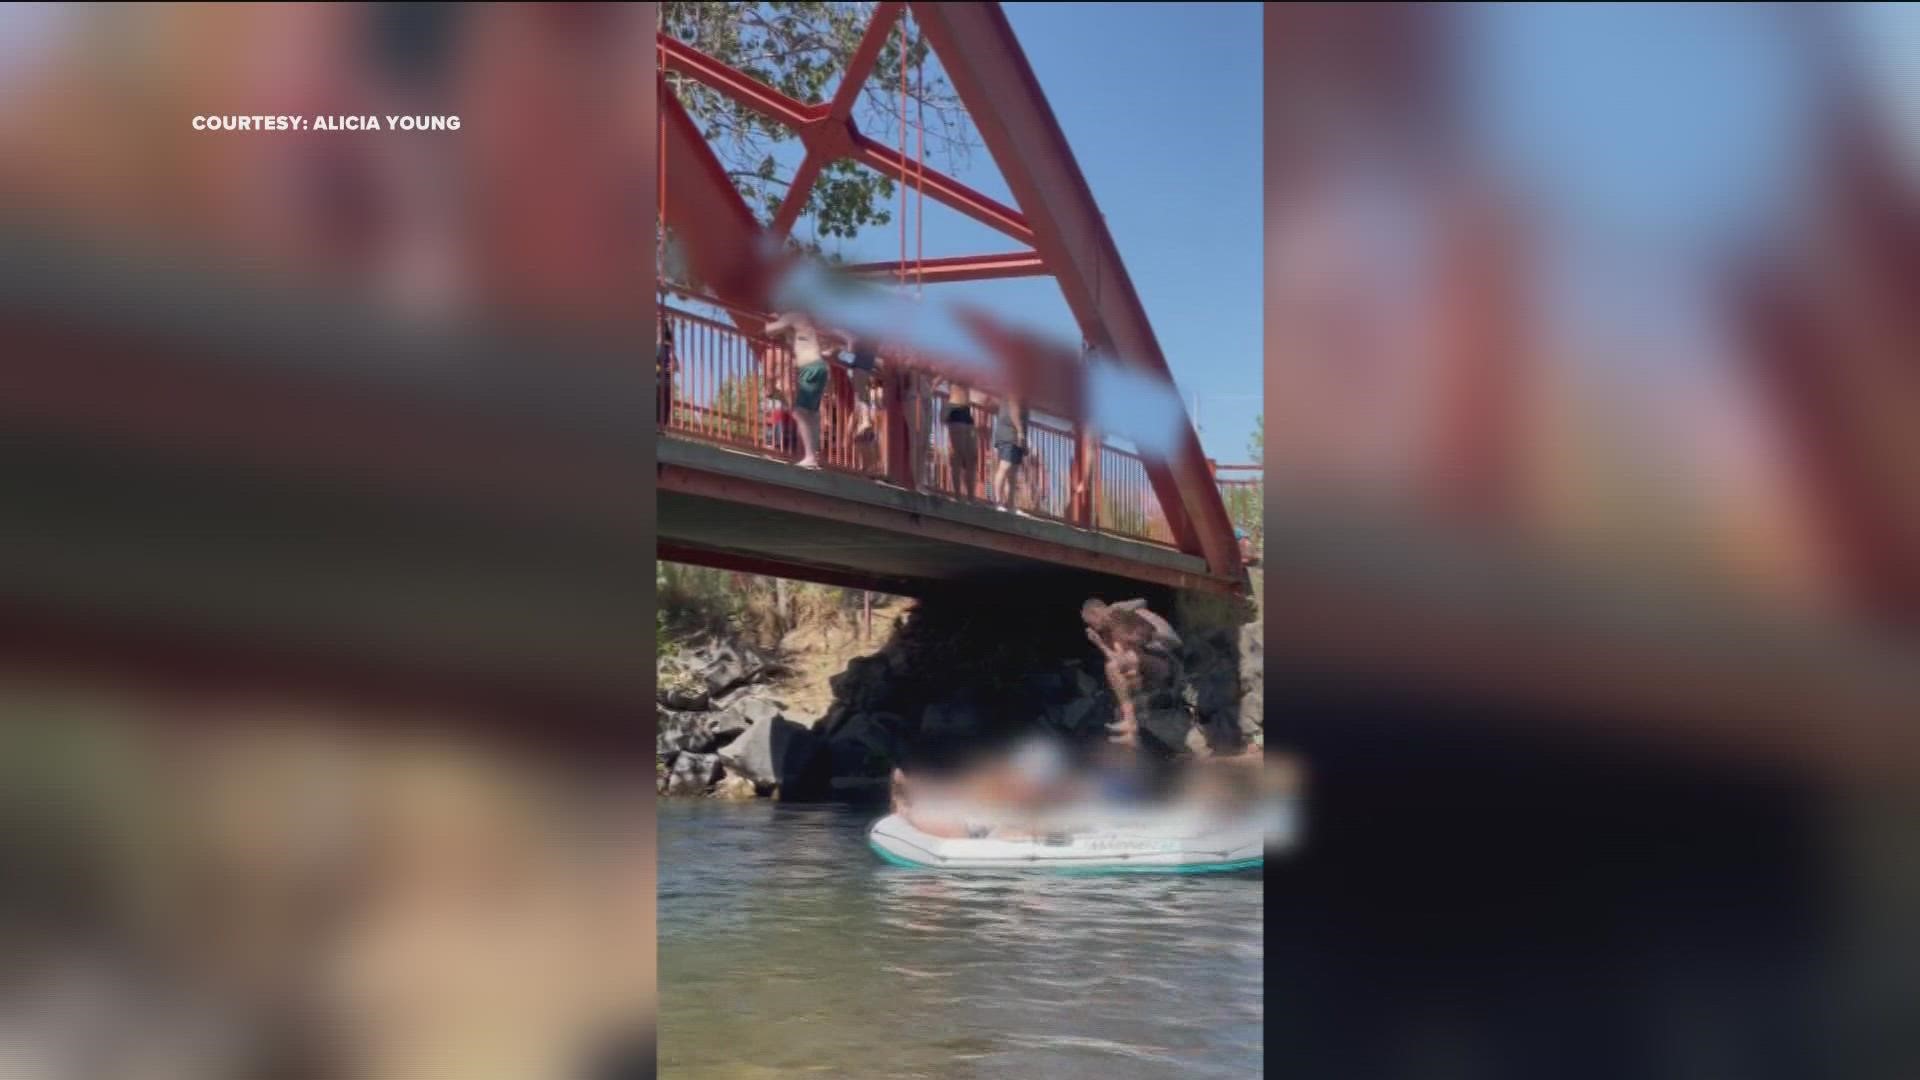 The Boise Fire Department used a rescue throw bag to help one of the victims to shore from the raft. Two people were taken to the hospital after the incident.